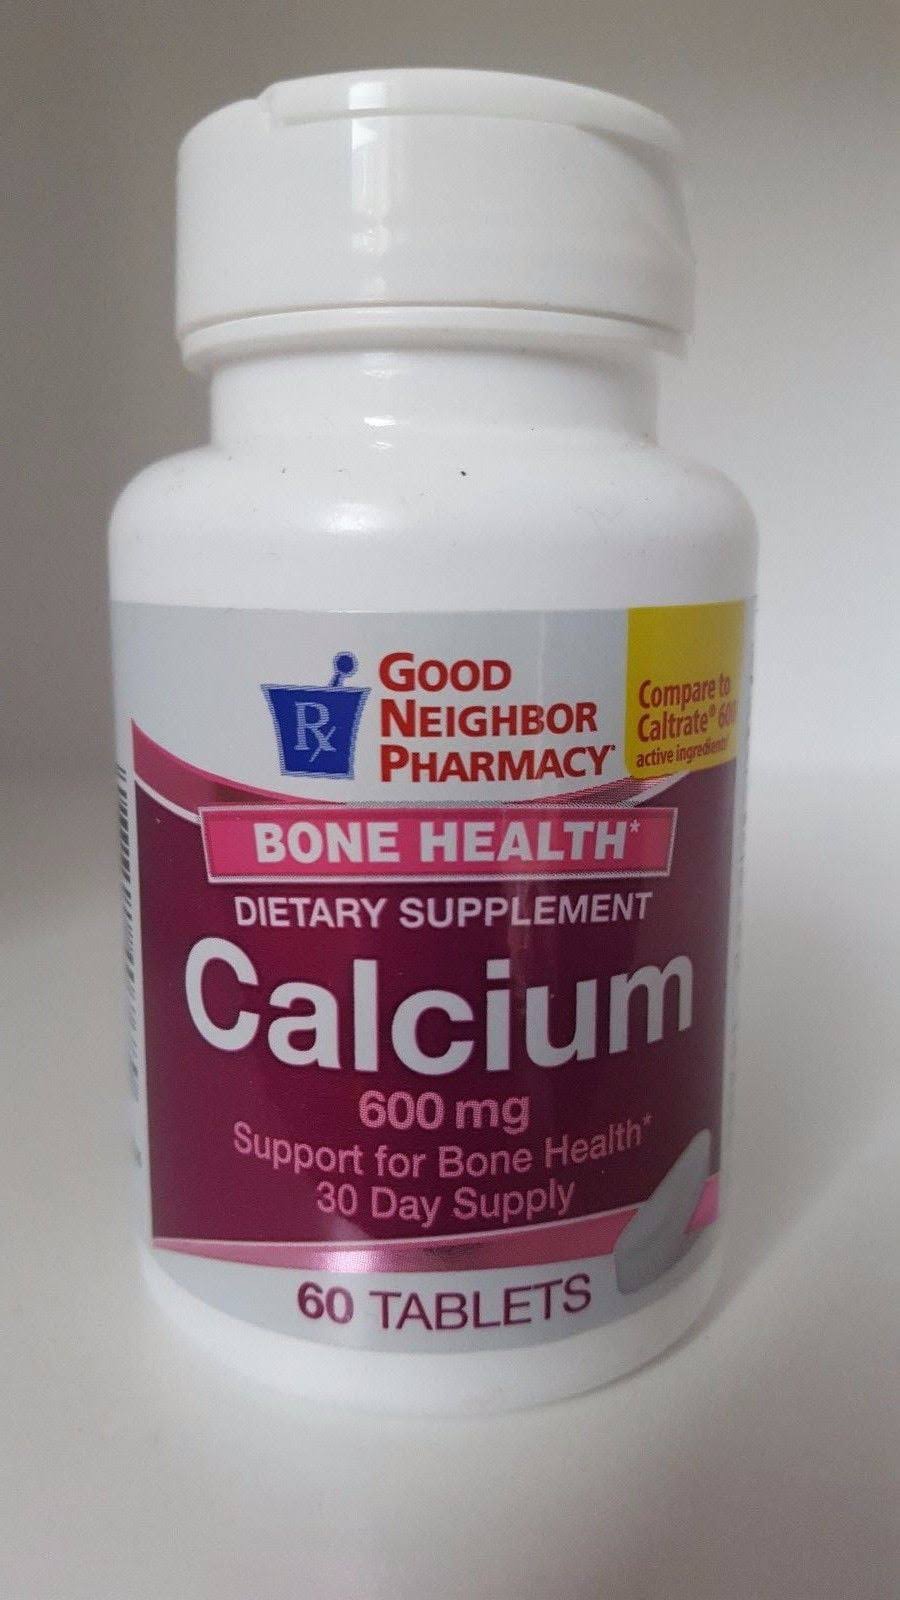 GNP Calcium 600 mg, 60 Tablets